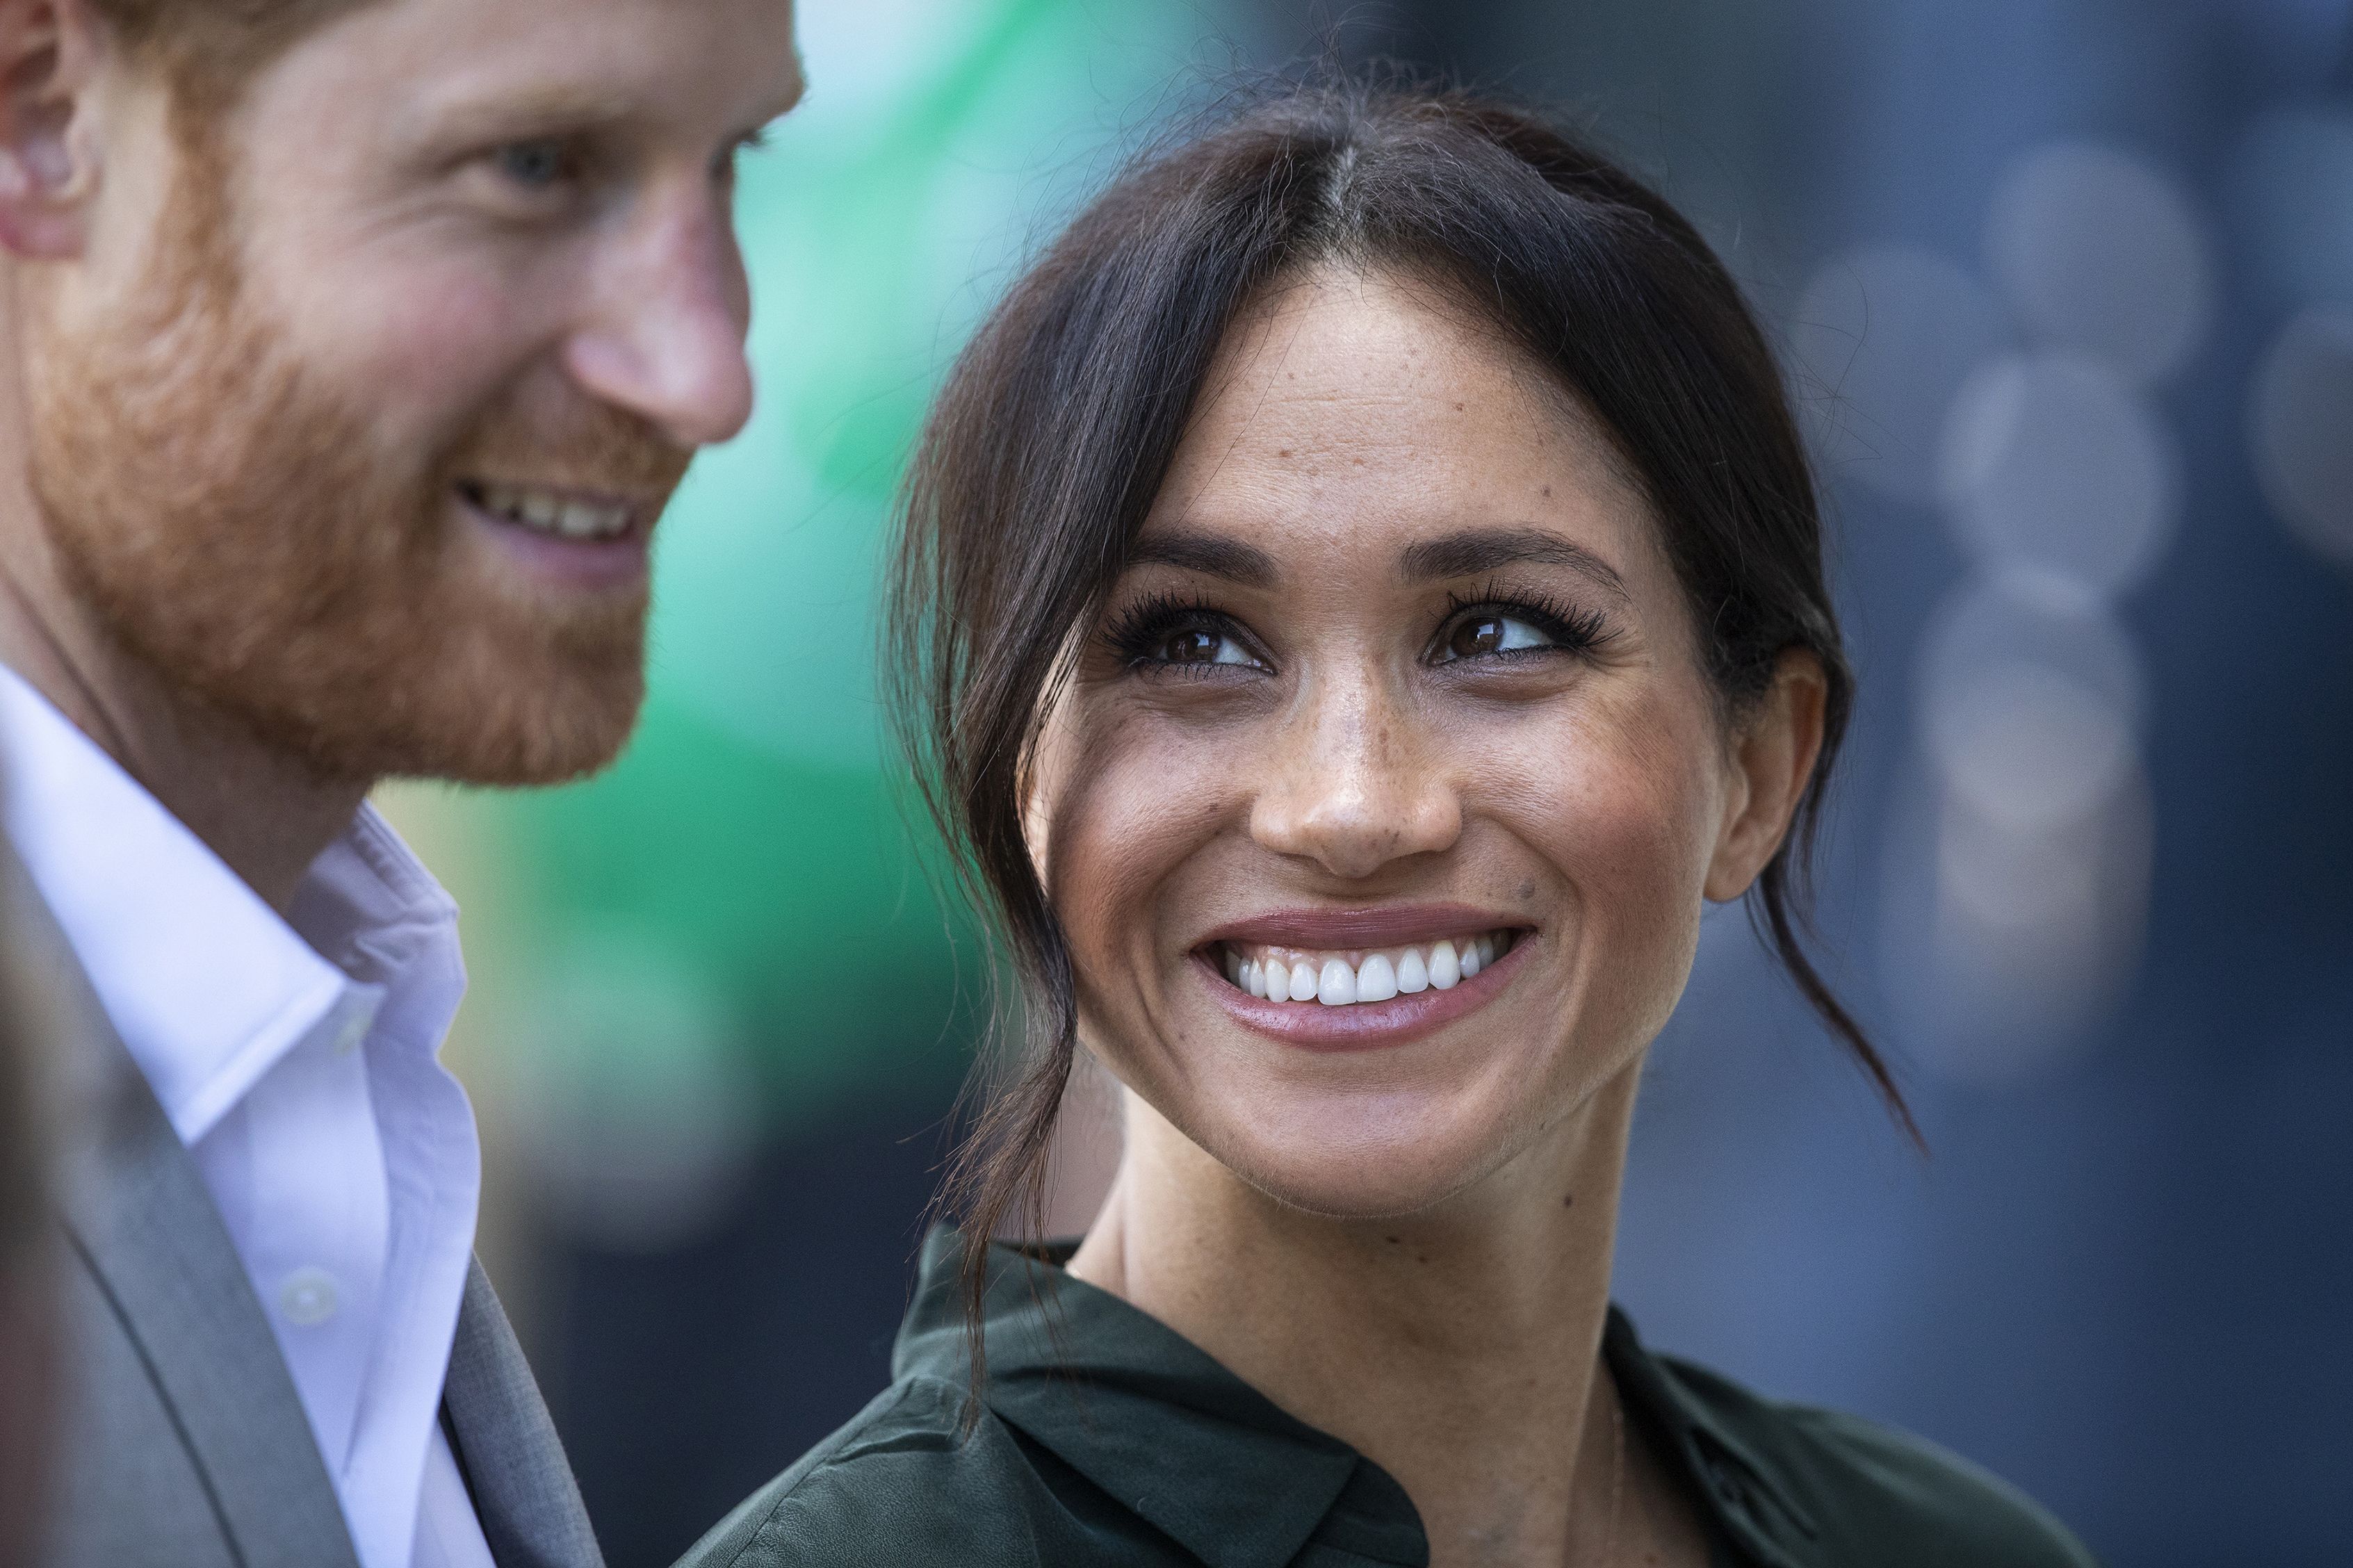 https://hips.hearstapps.com/hmg-prod.s3.amazonaws.com/images/hbz-prince-harry-meghan-markle-cute-moments-2018-10-gettyimages-1044999400.jpg?crop=1xw:1xh;center,top